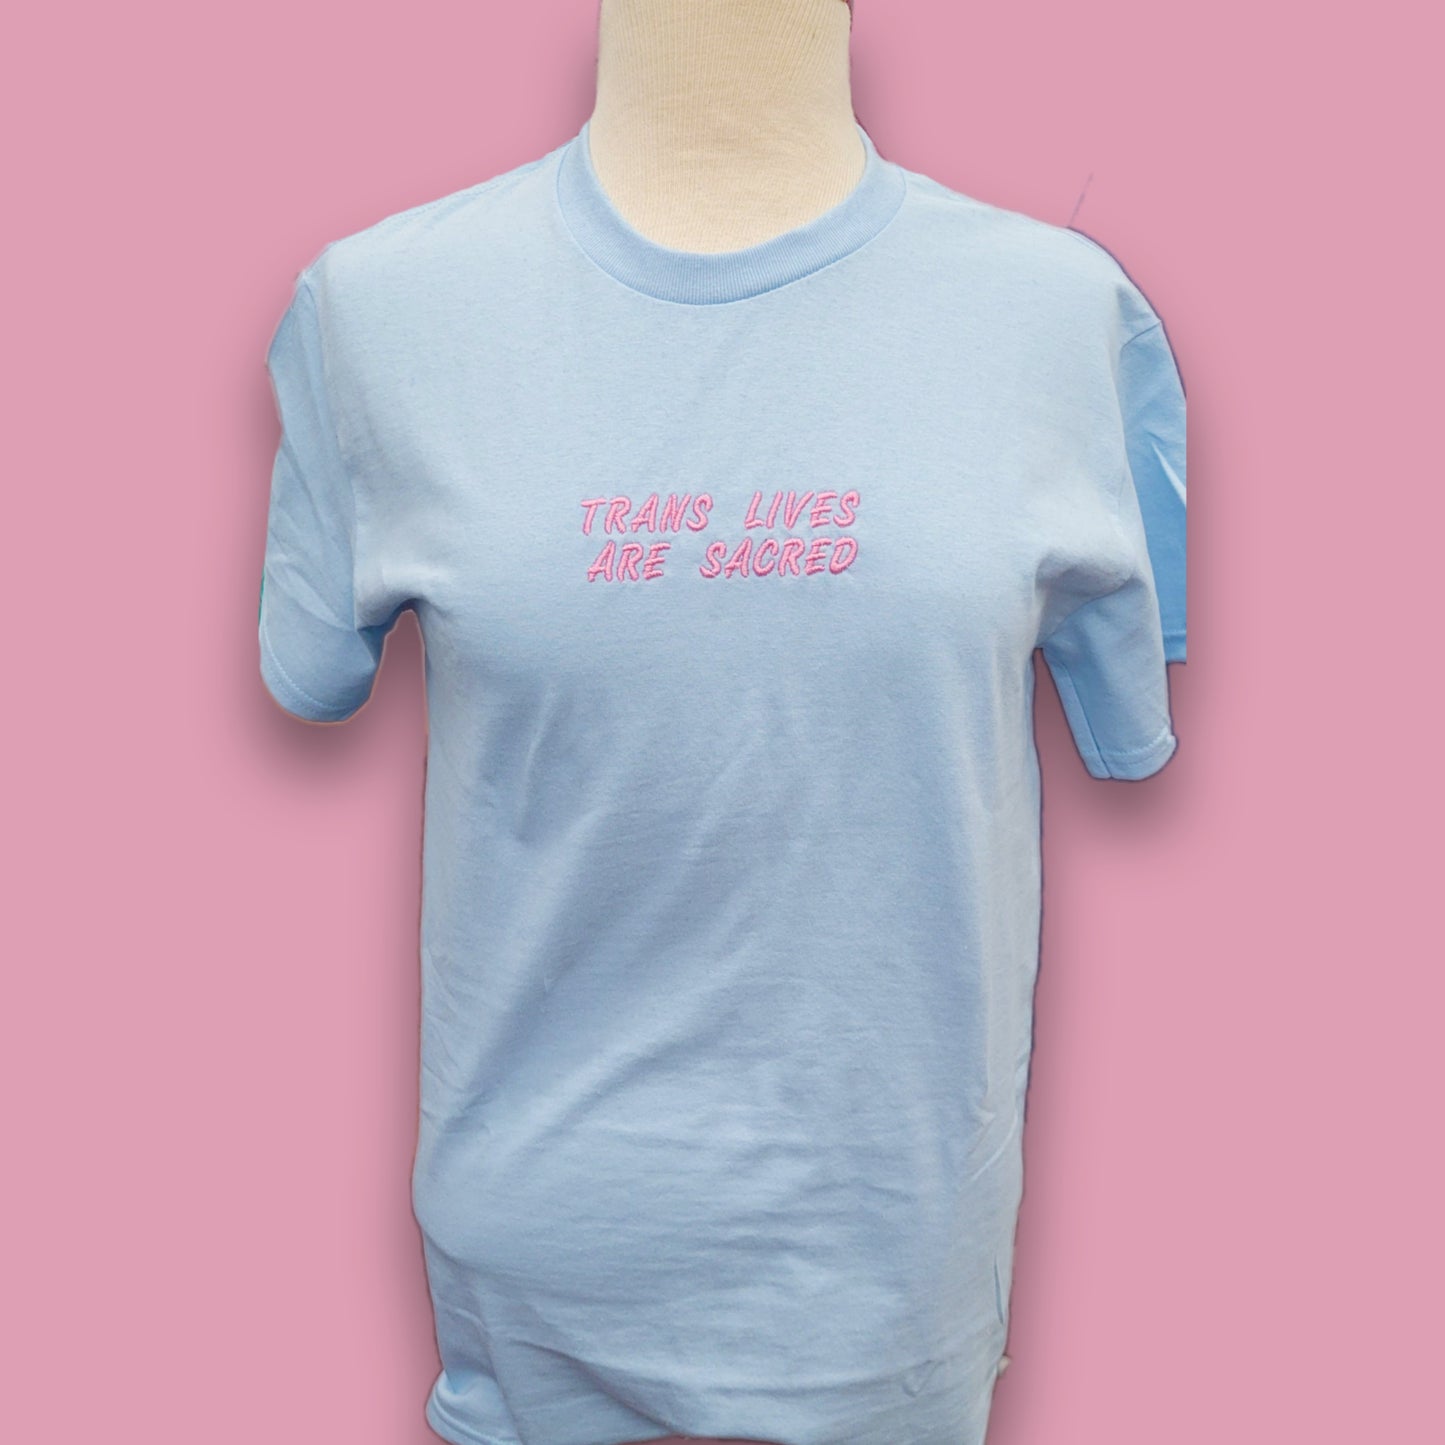 Trans Lives Are Sacred Embroidered T-Shirt